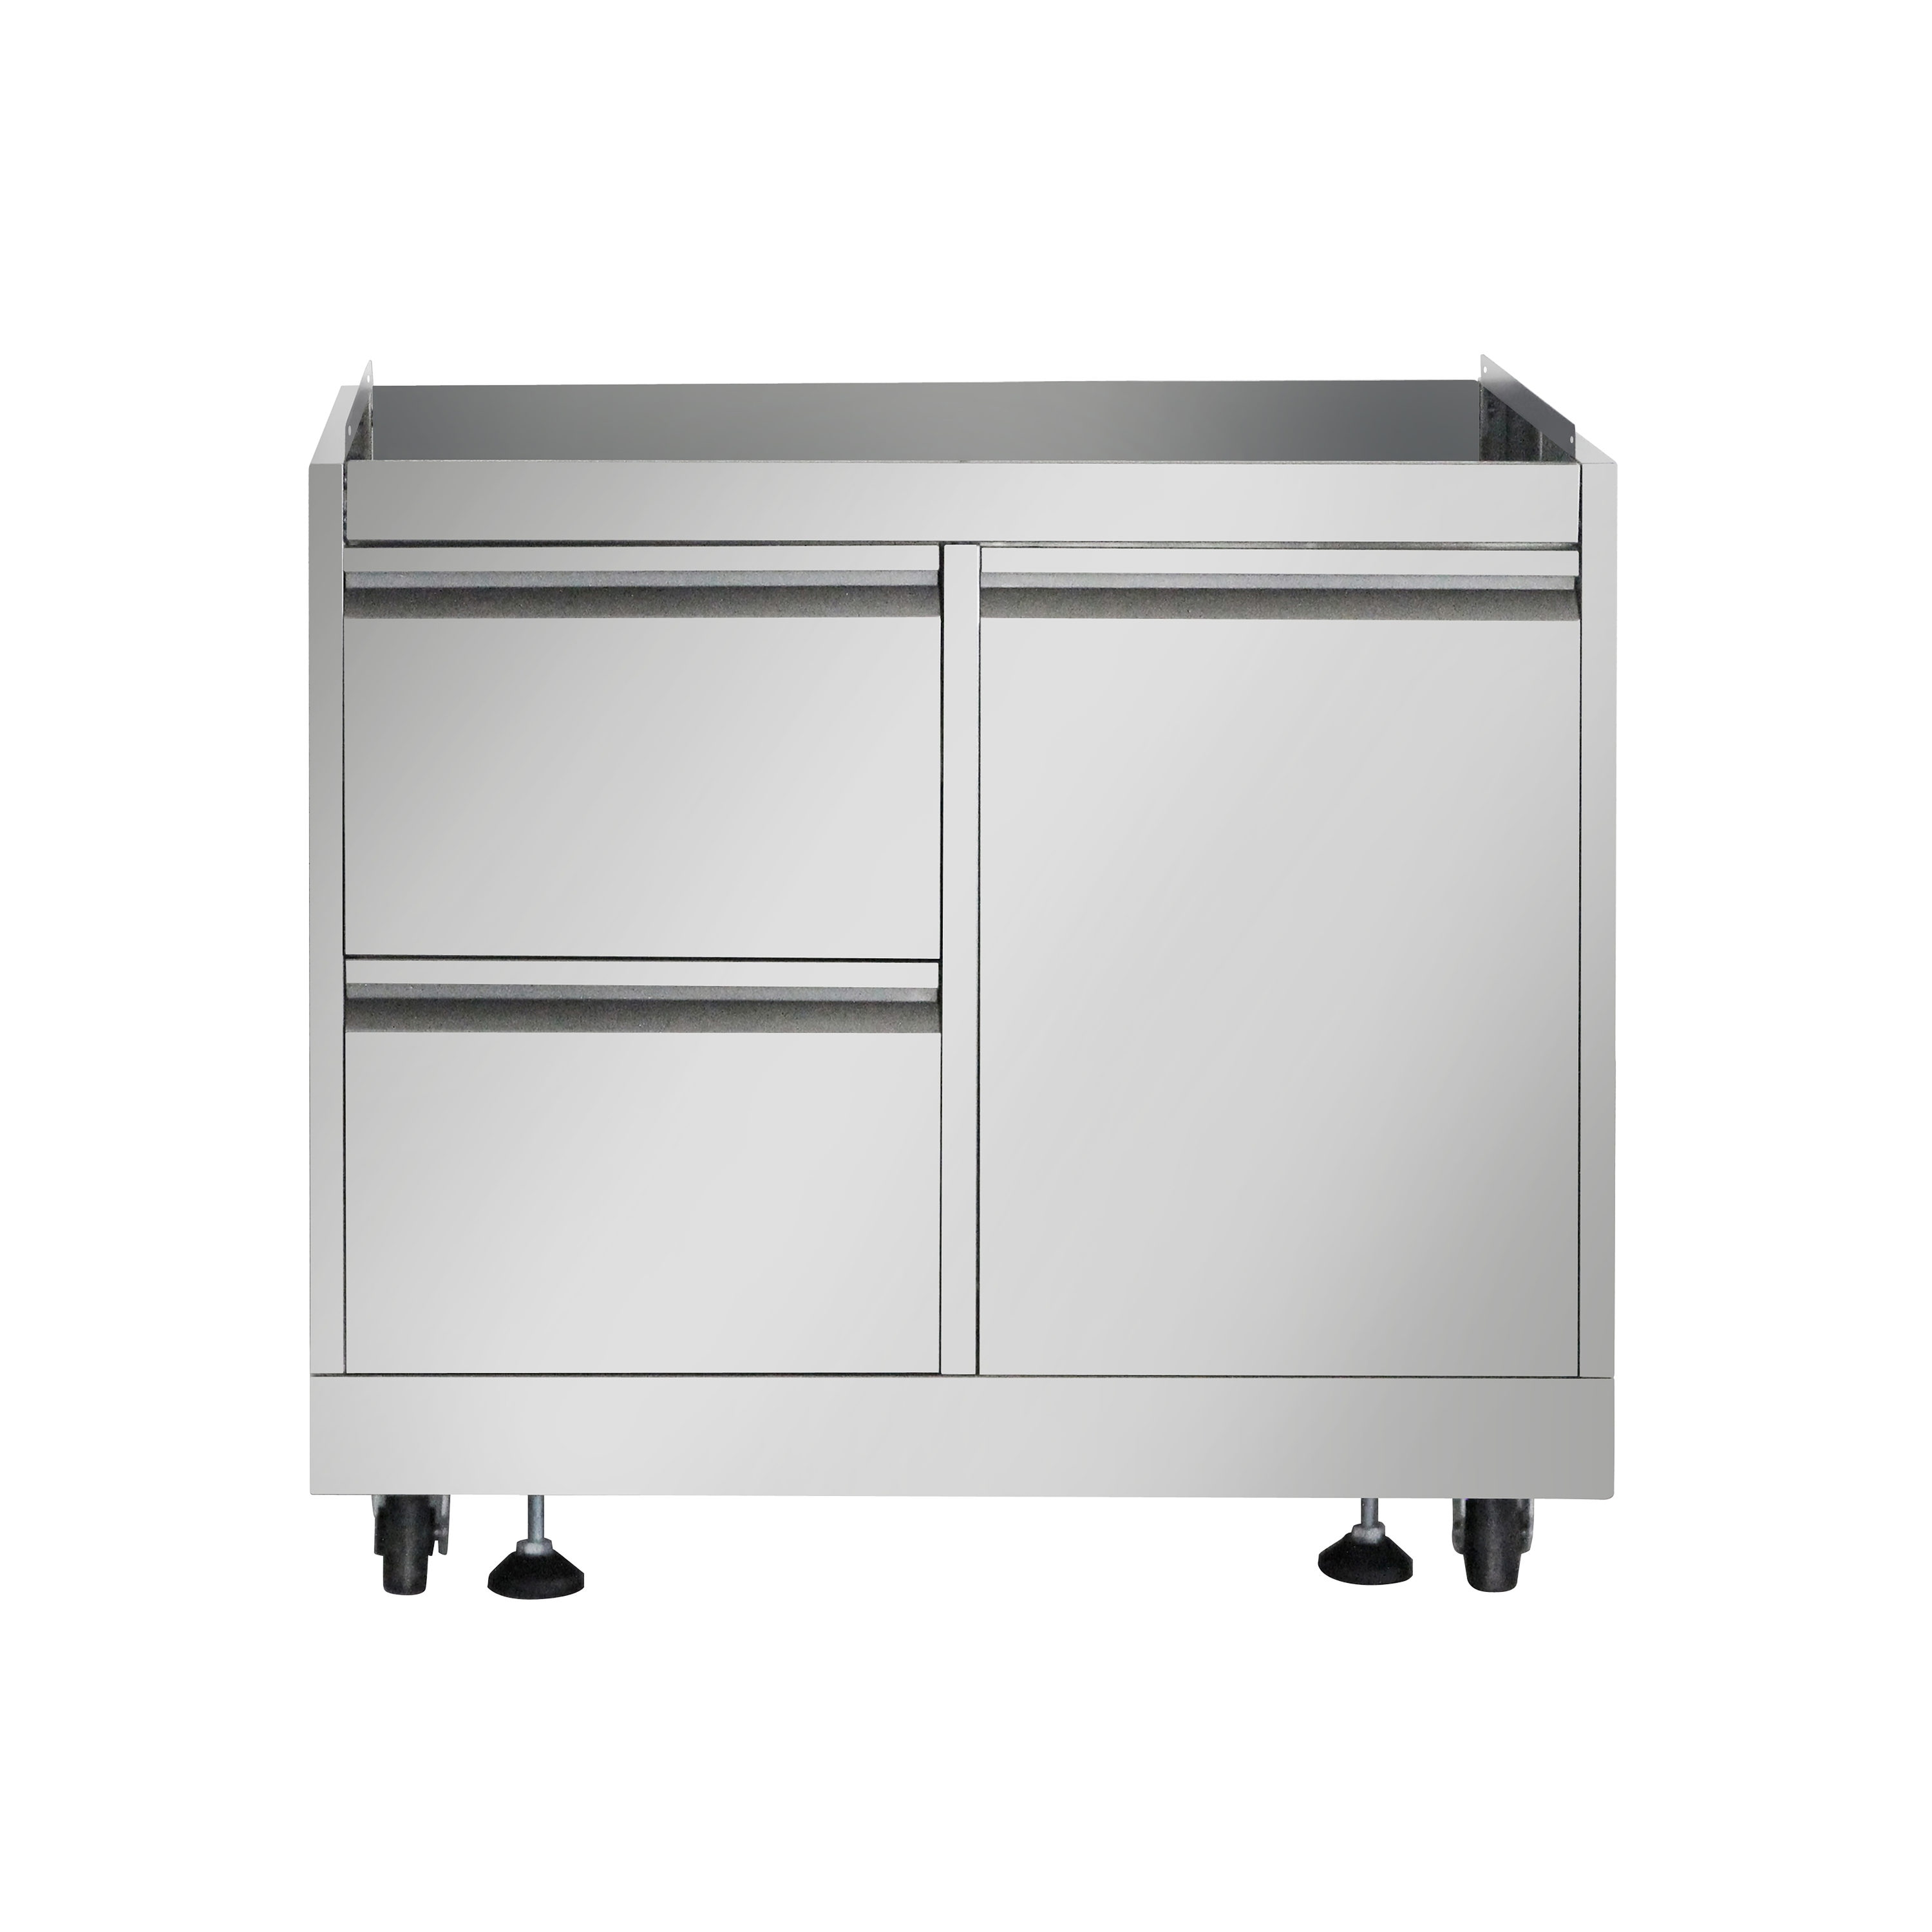 Outdoor Kitchens - Lowe's